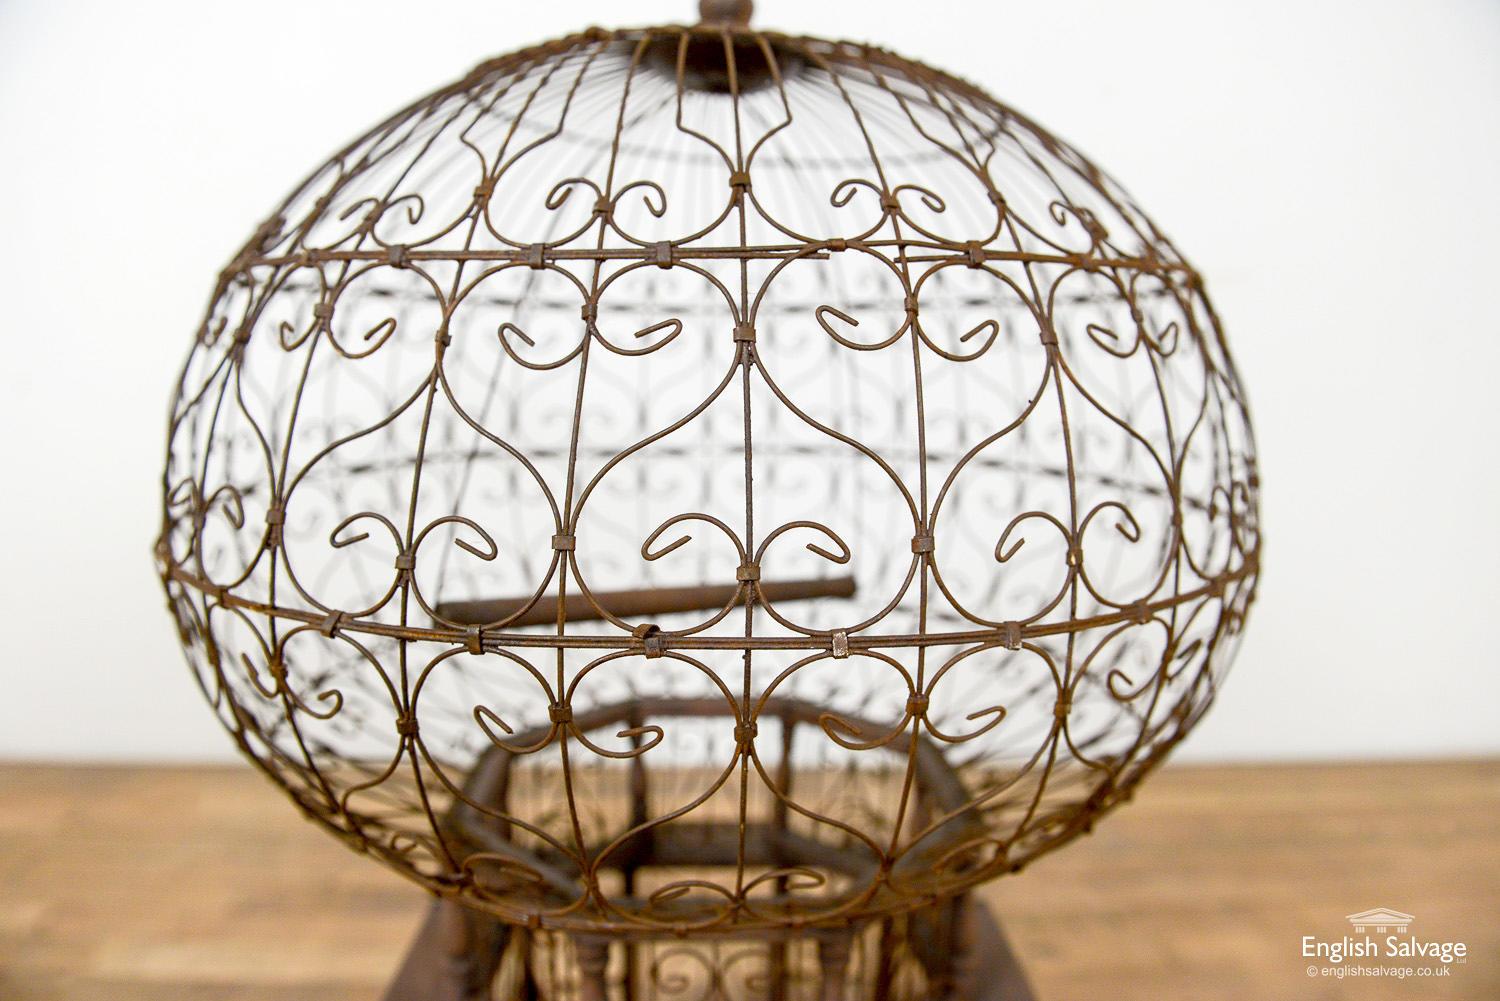 Vintage French Wood and Wire Birdcage, 20th Century For Sale 1